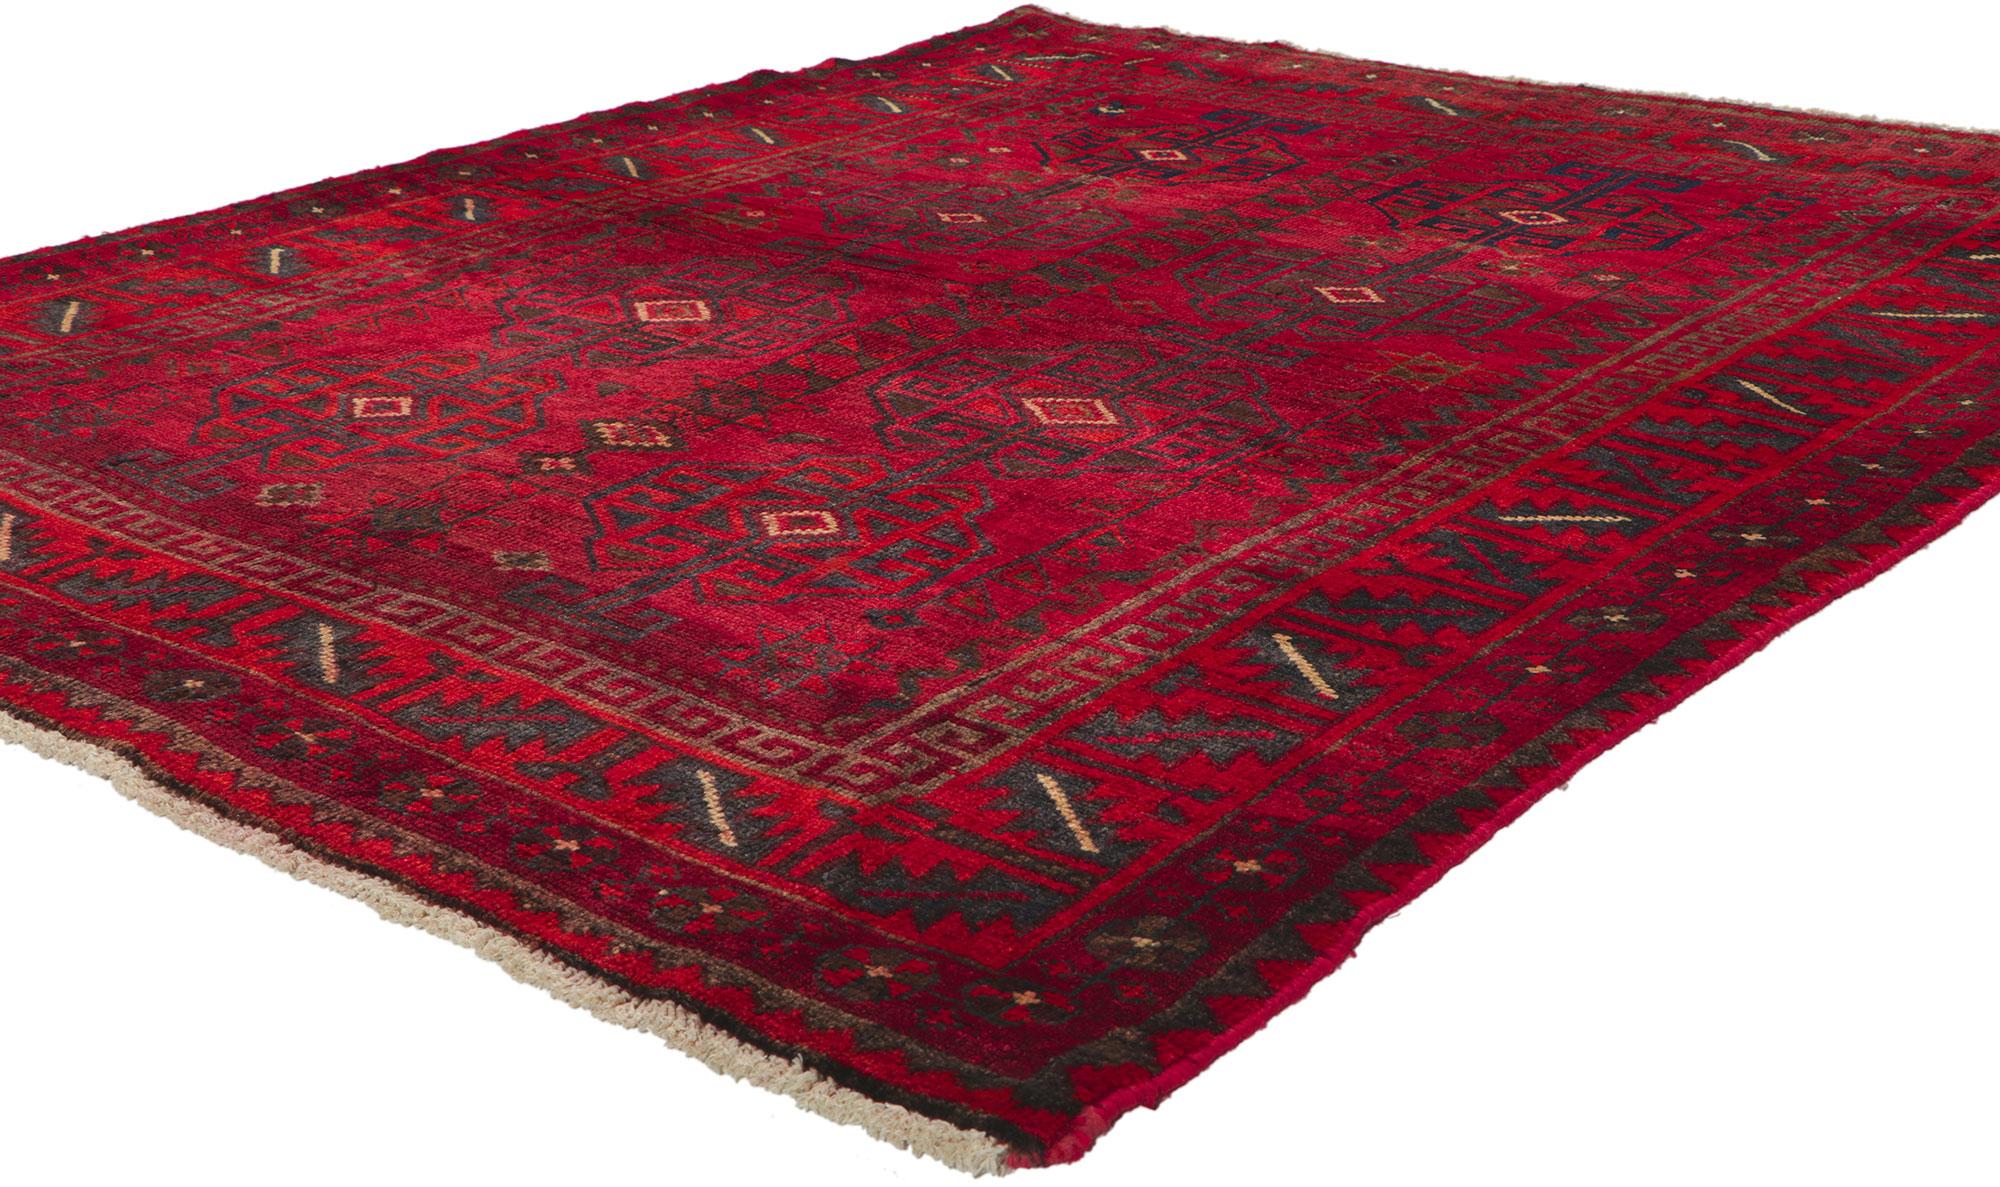 61085 Vintage Turkoman rug, 05'00 x 06'01. Cleverly composed with saturated colors, this hand knotted wool vintage Turkoman rug beautifully embodies Mid-Century Modern style. The abrashed red field features an all-over geometric pattern composed of